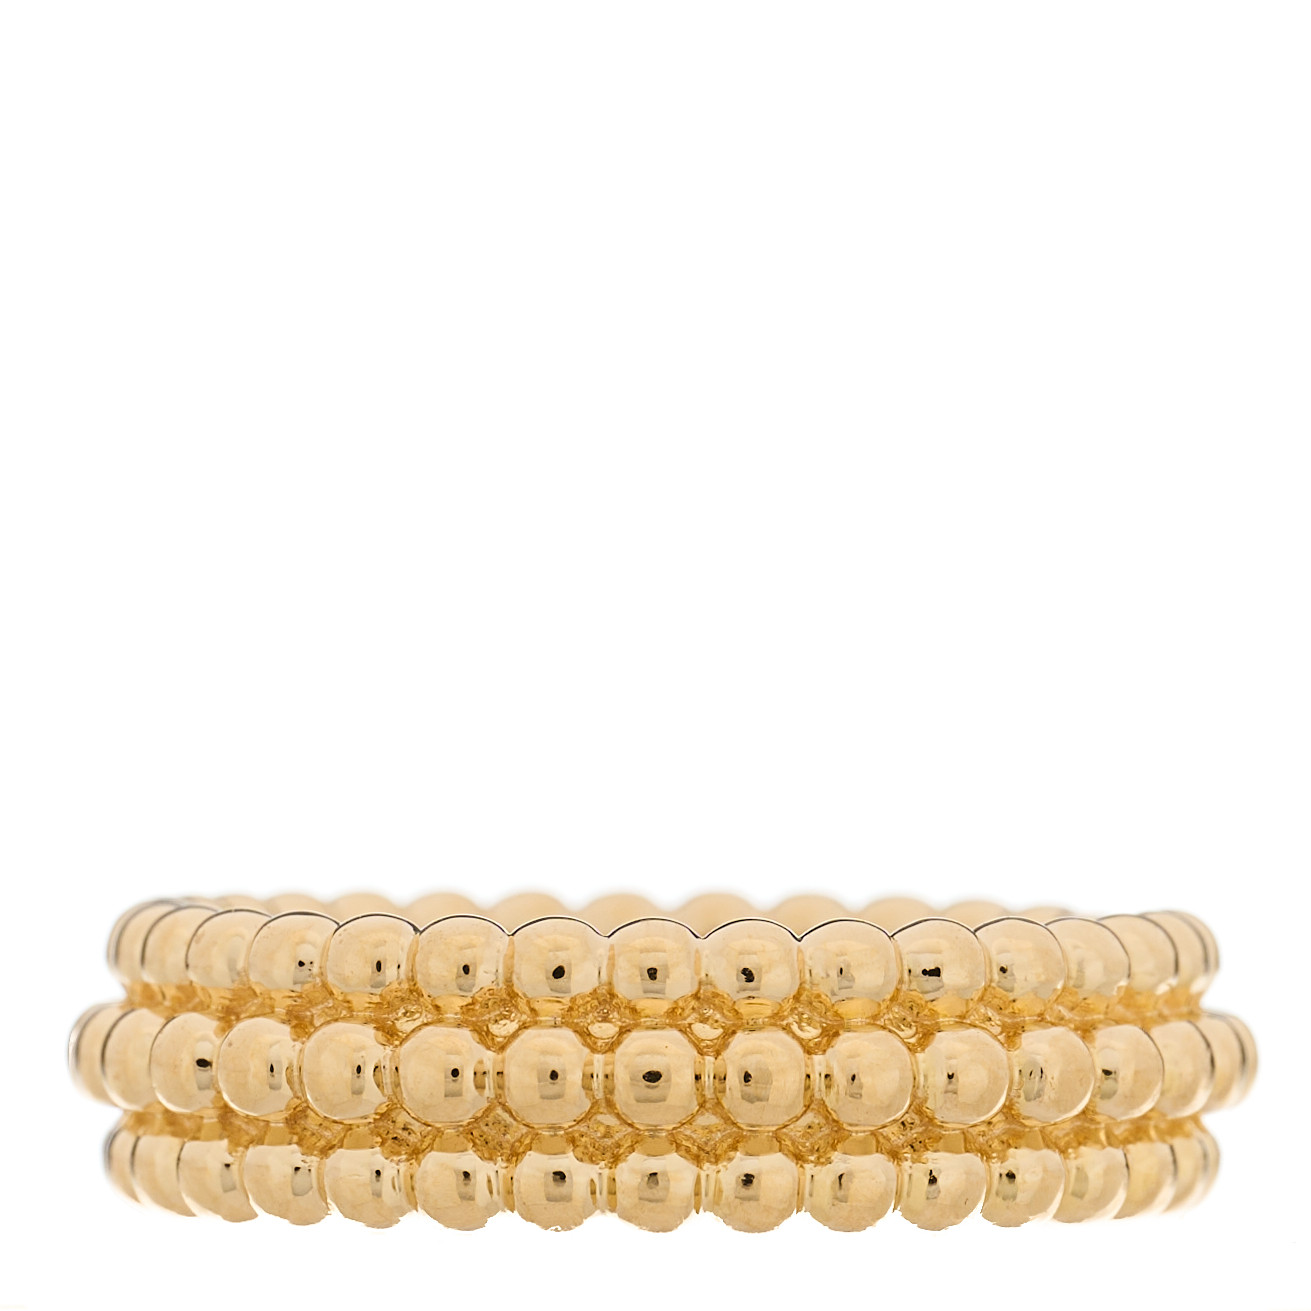 VAN CLEEF & ARPELS 18K Yellow Gold Perlee Pearls of Gold 3 Row Ring by FASHIONPHILE